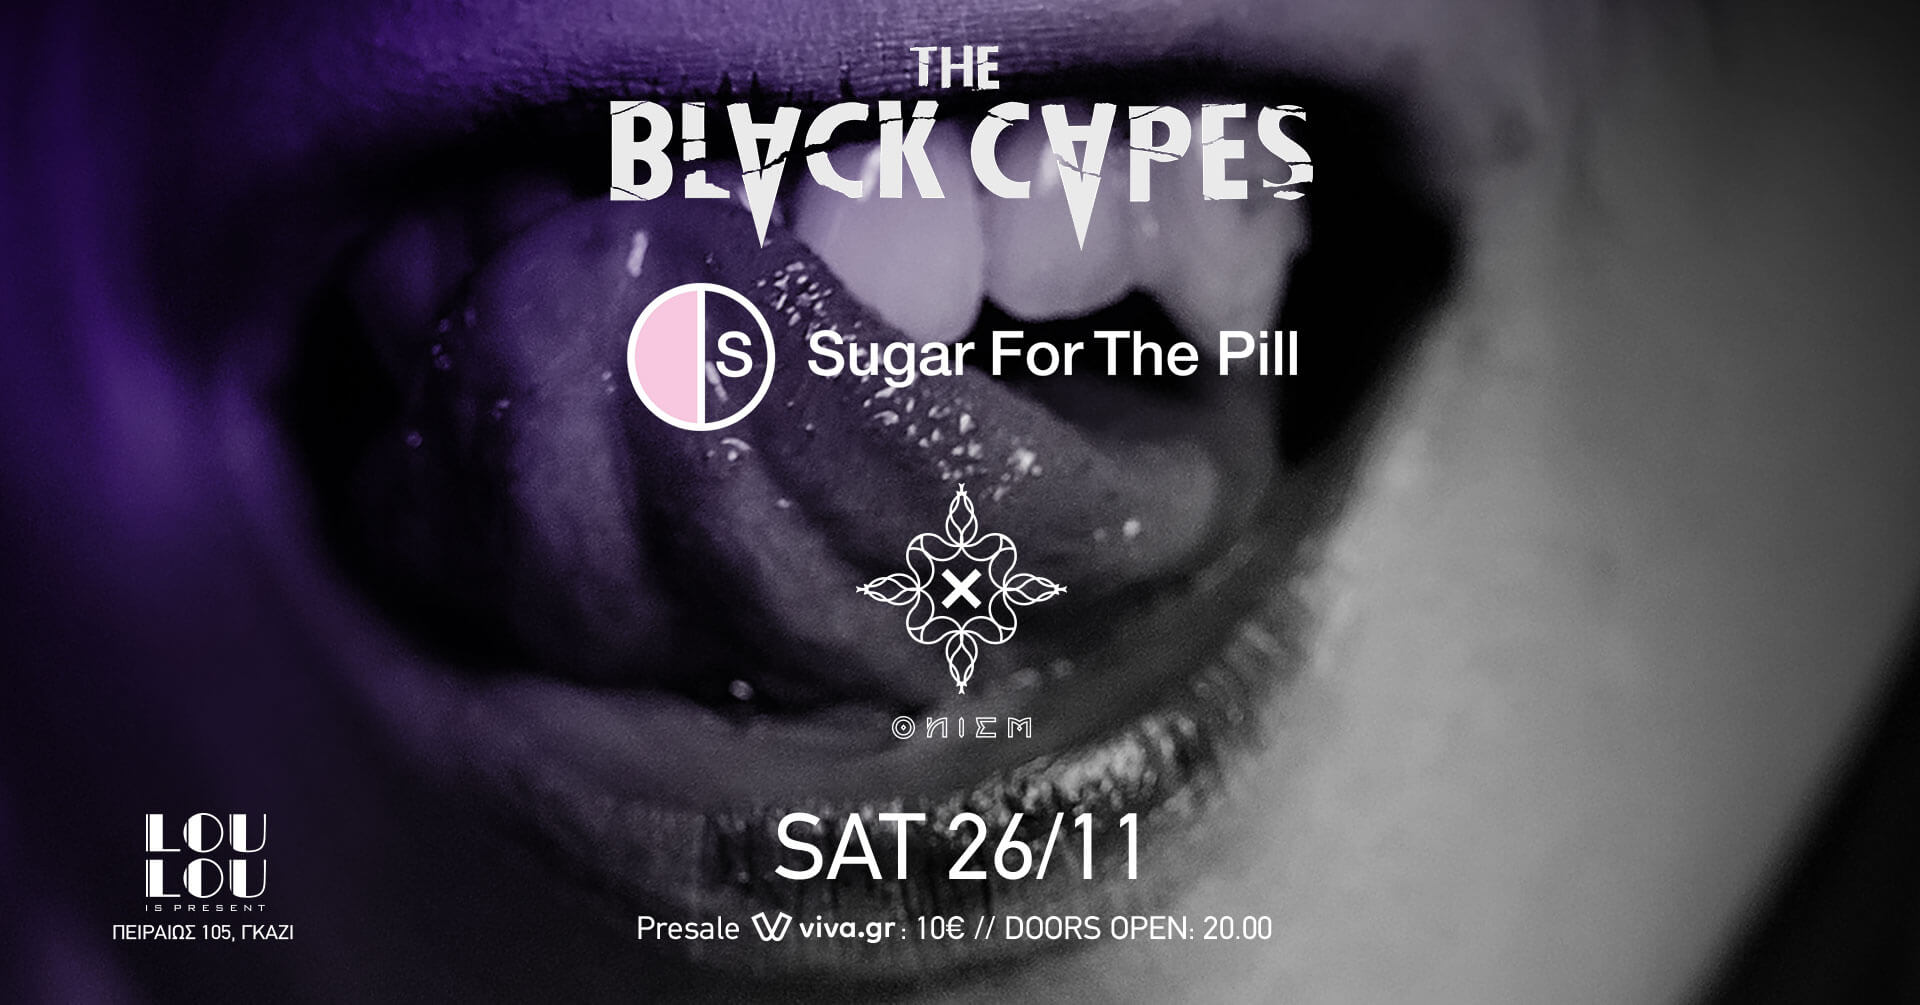 The Black Capes / Sugar For The Pill / Onism, Live